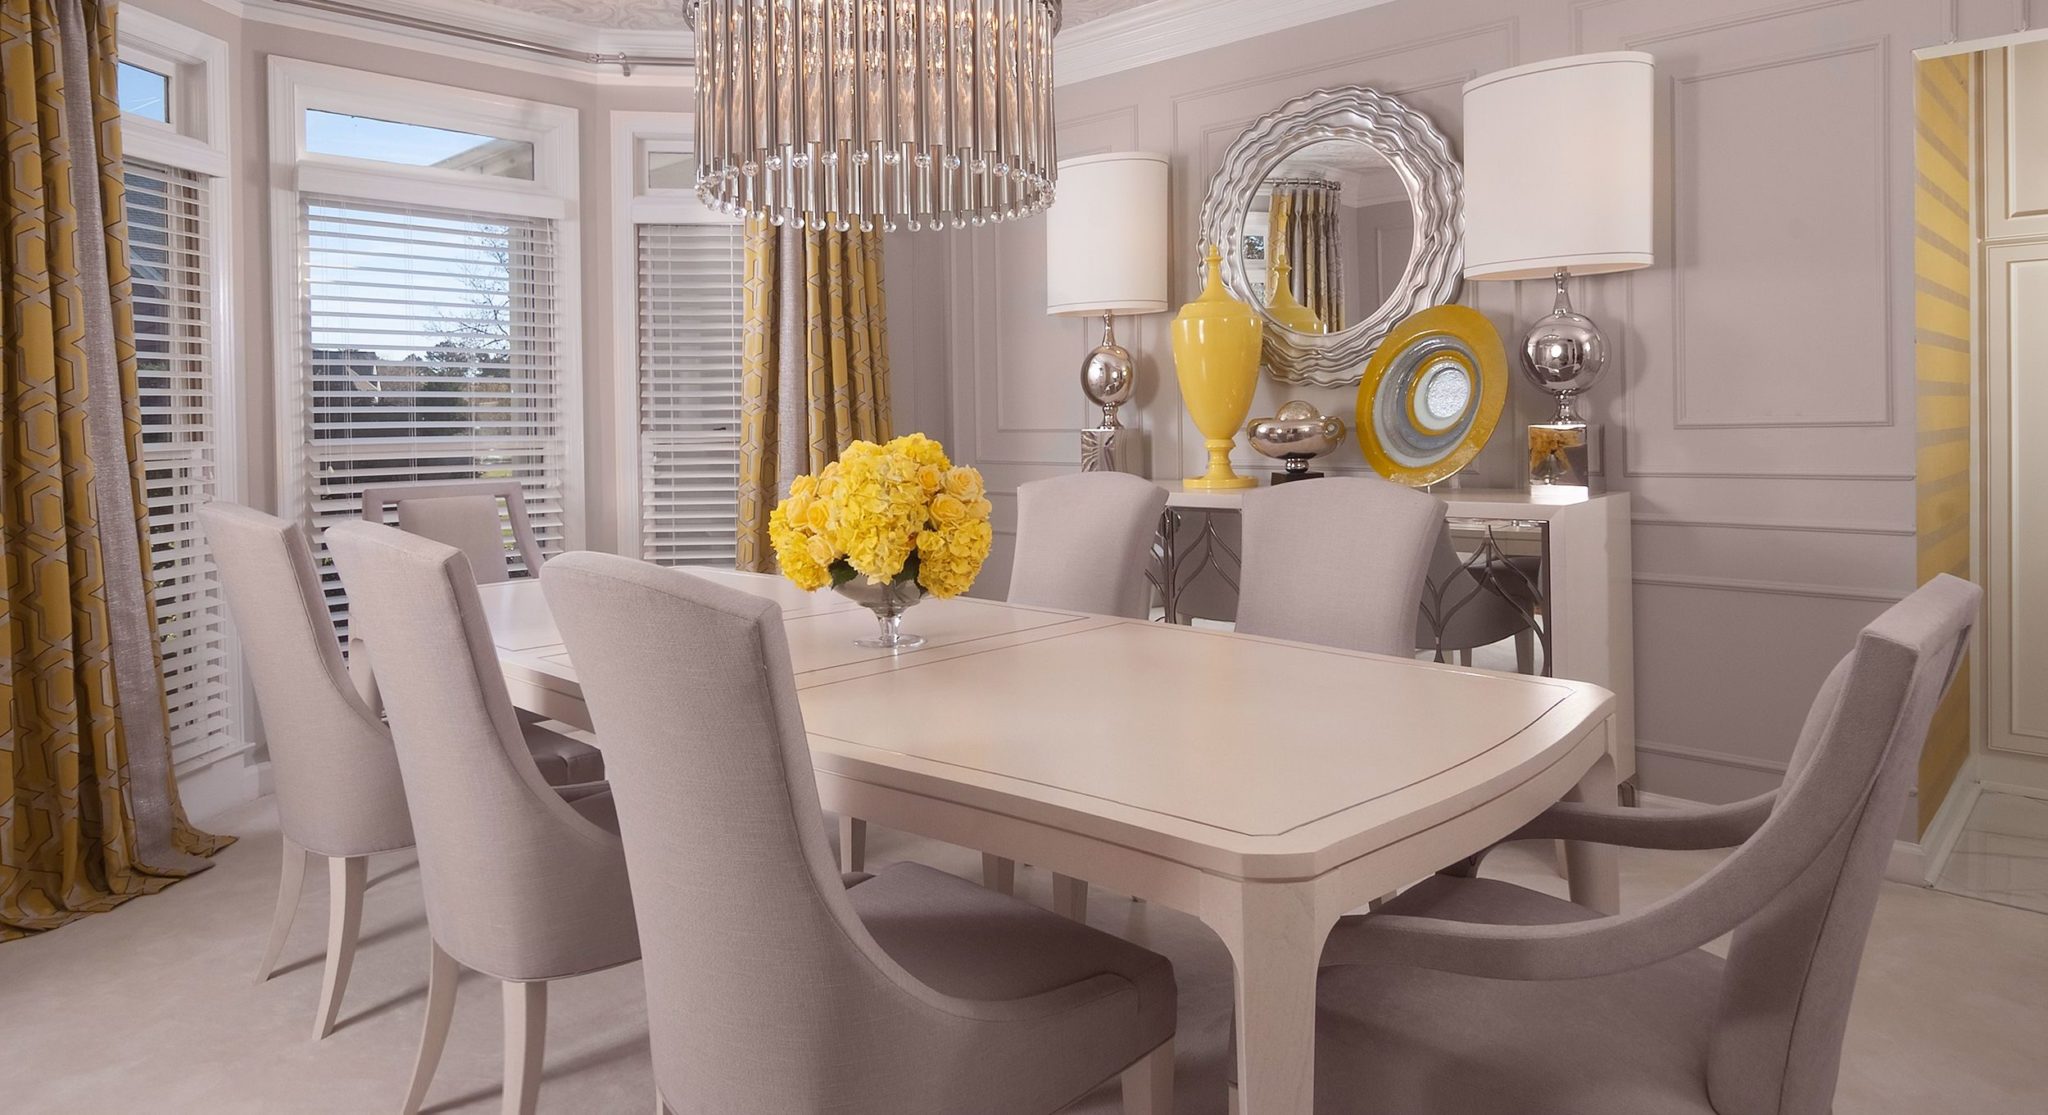 Small Dining Room Details that can Make a Major Statement